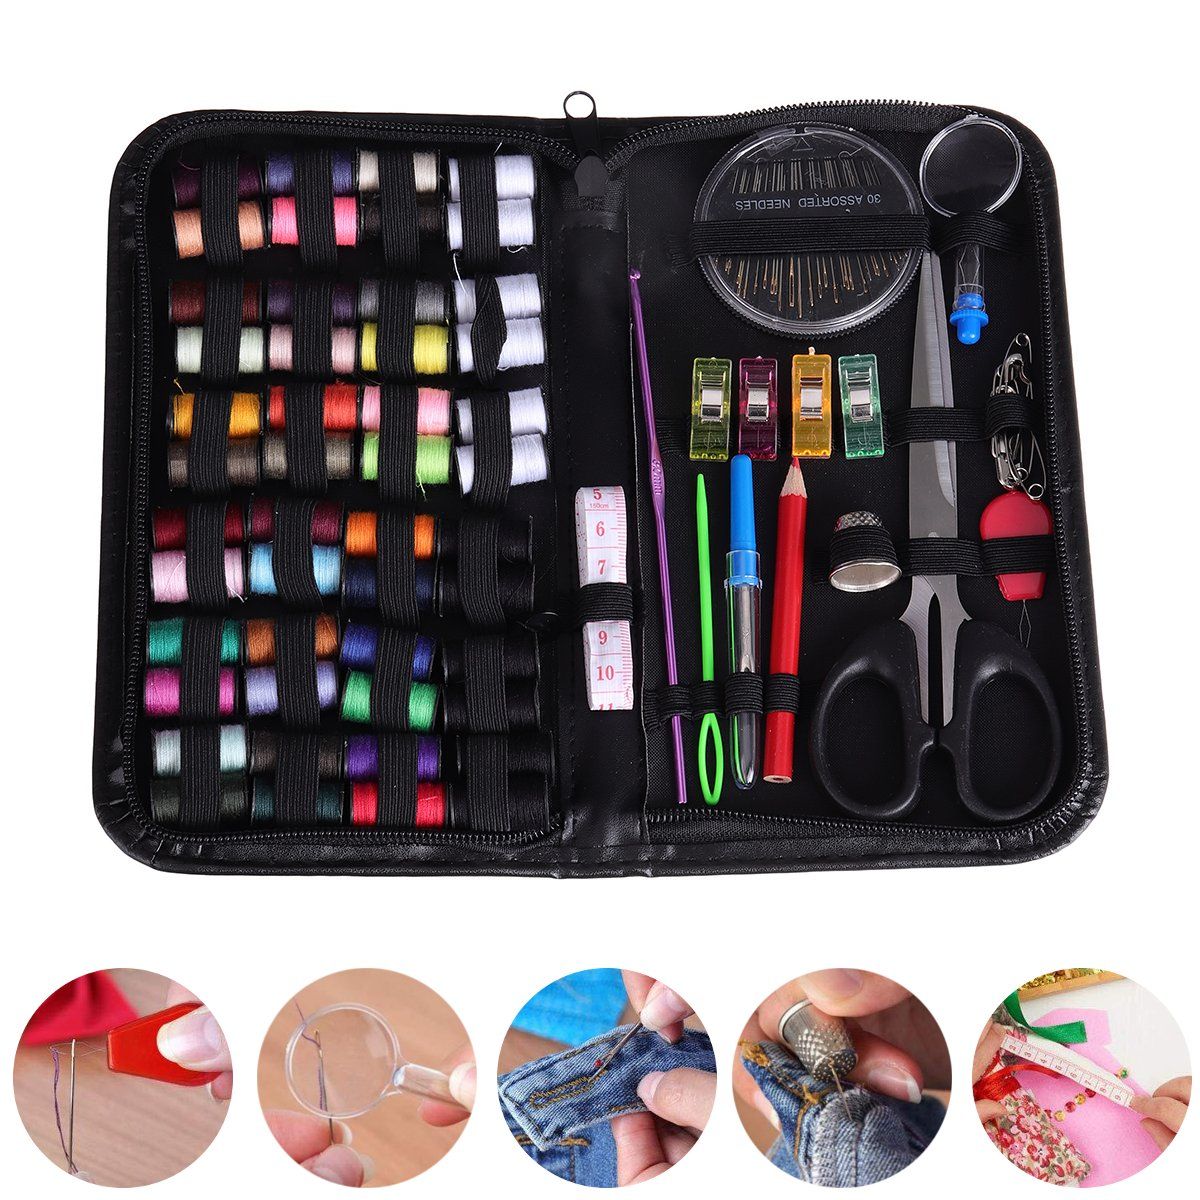 172PcsSet-Sewing-Coils-Kit-Threads-Craft-Hand-Quilting-Stitching-Portable-Bag-1758256